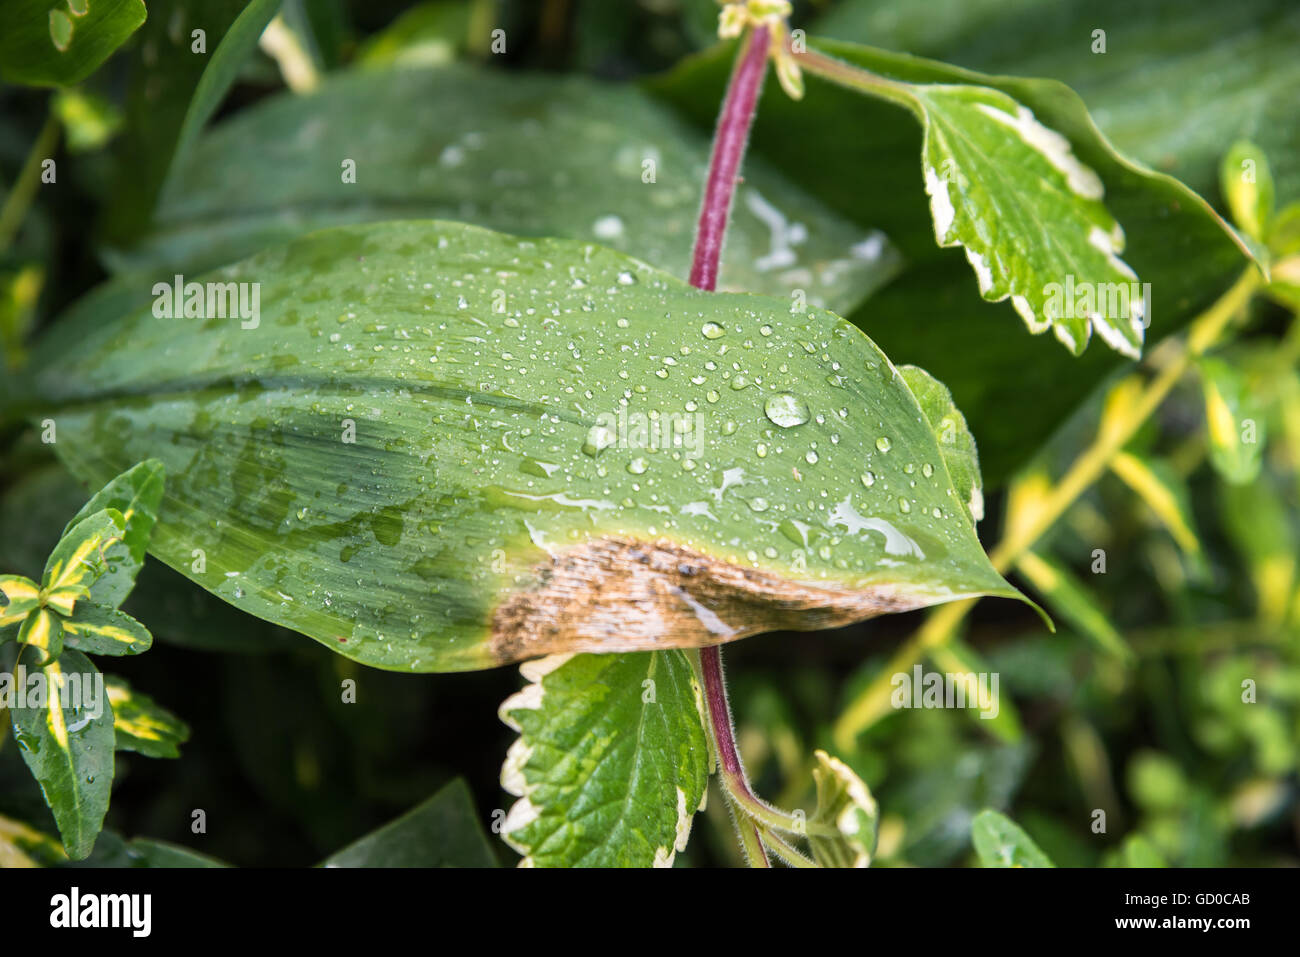 Drops of water on a leaf as natural background. Shallow depth of field. Stock Photo